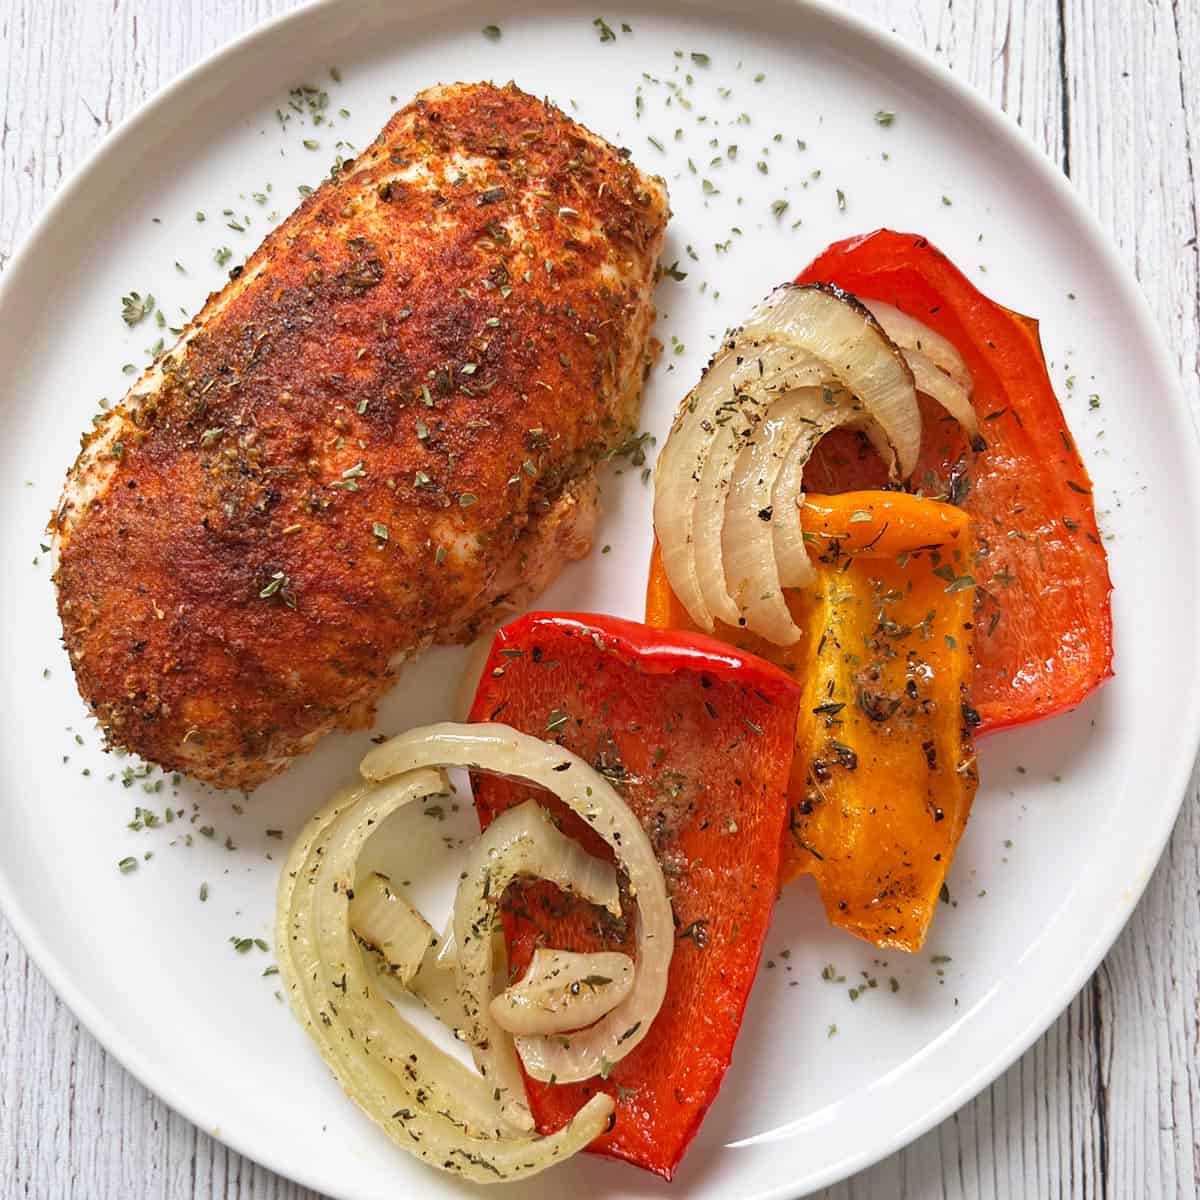 A baked chicken breast is served on a white plate with roasted peppers and onions.